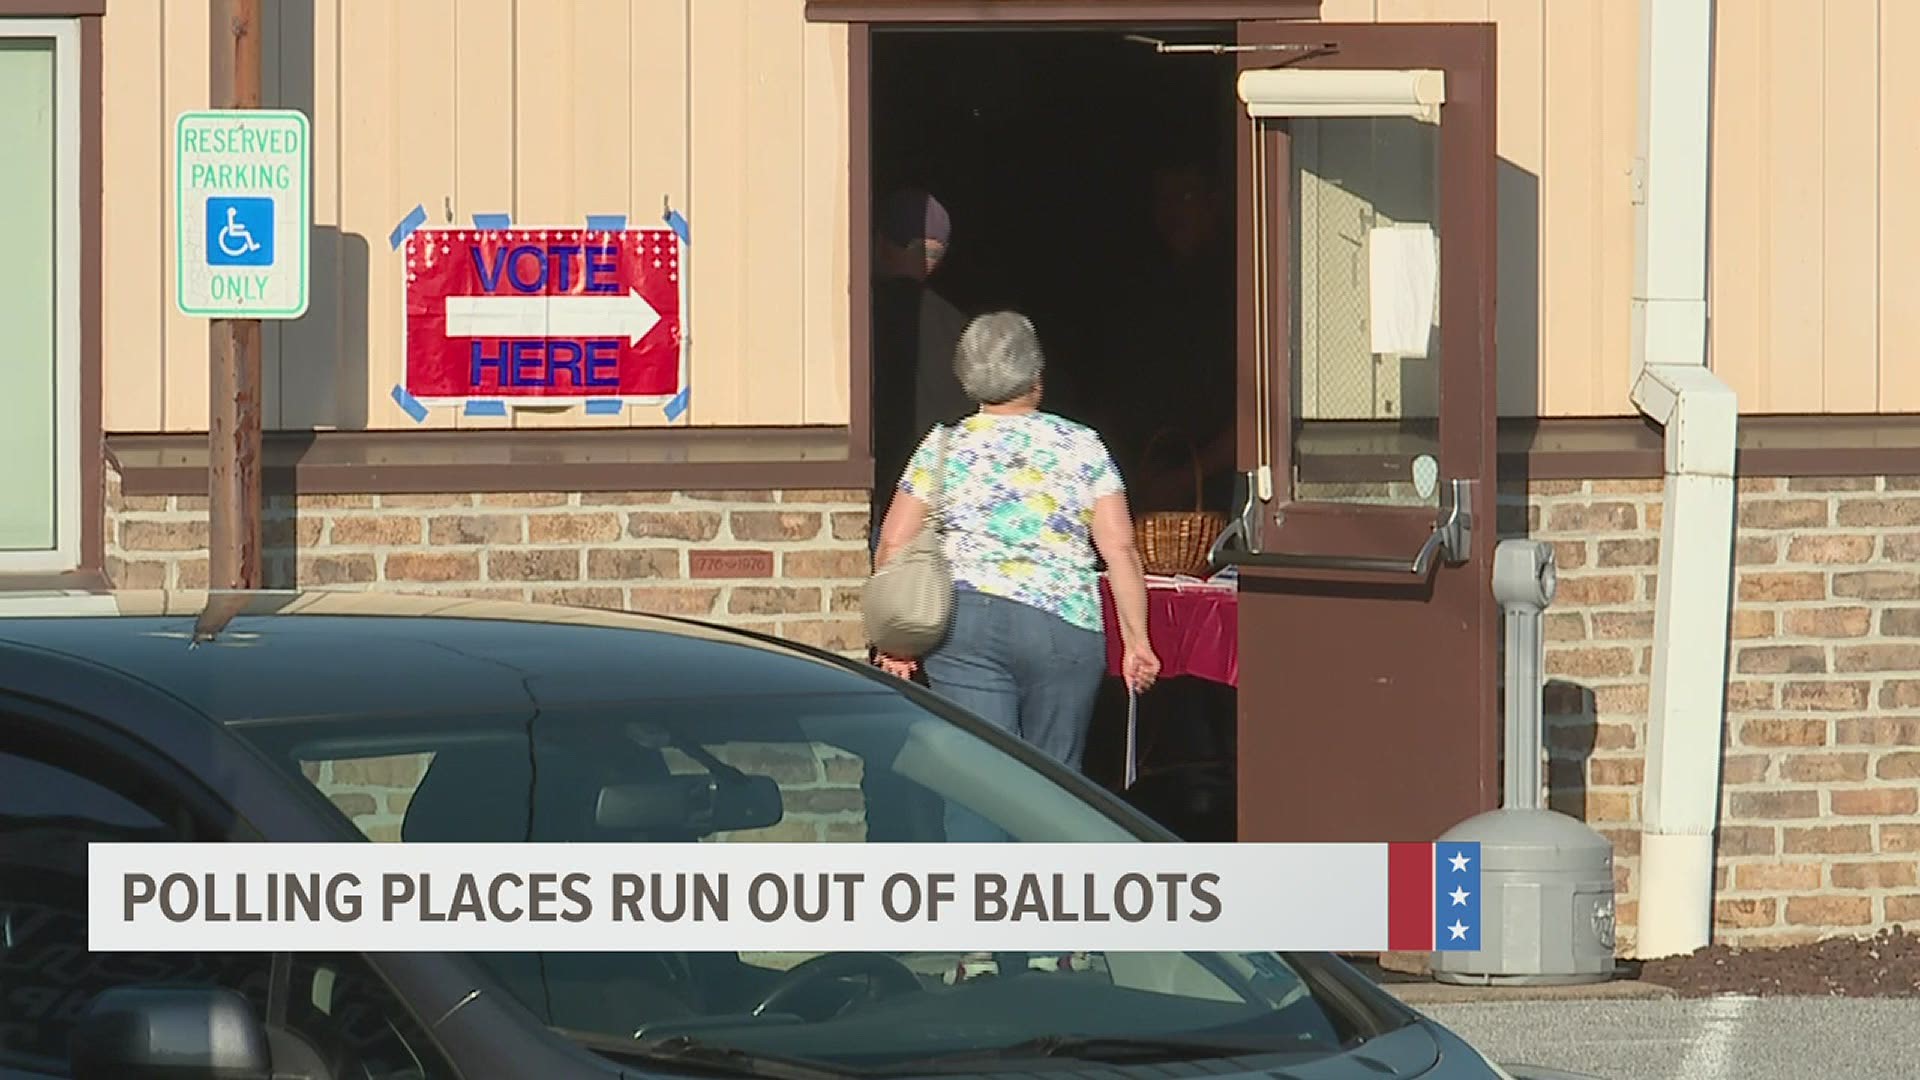 York County election officials confirm several polling locations across the county ran out of ballots on Tuesday. The ballots have been replenished.